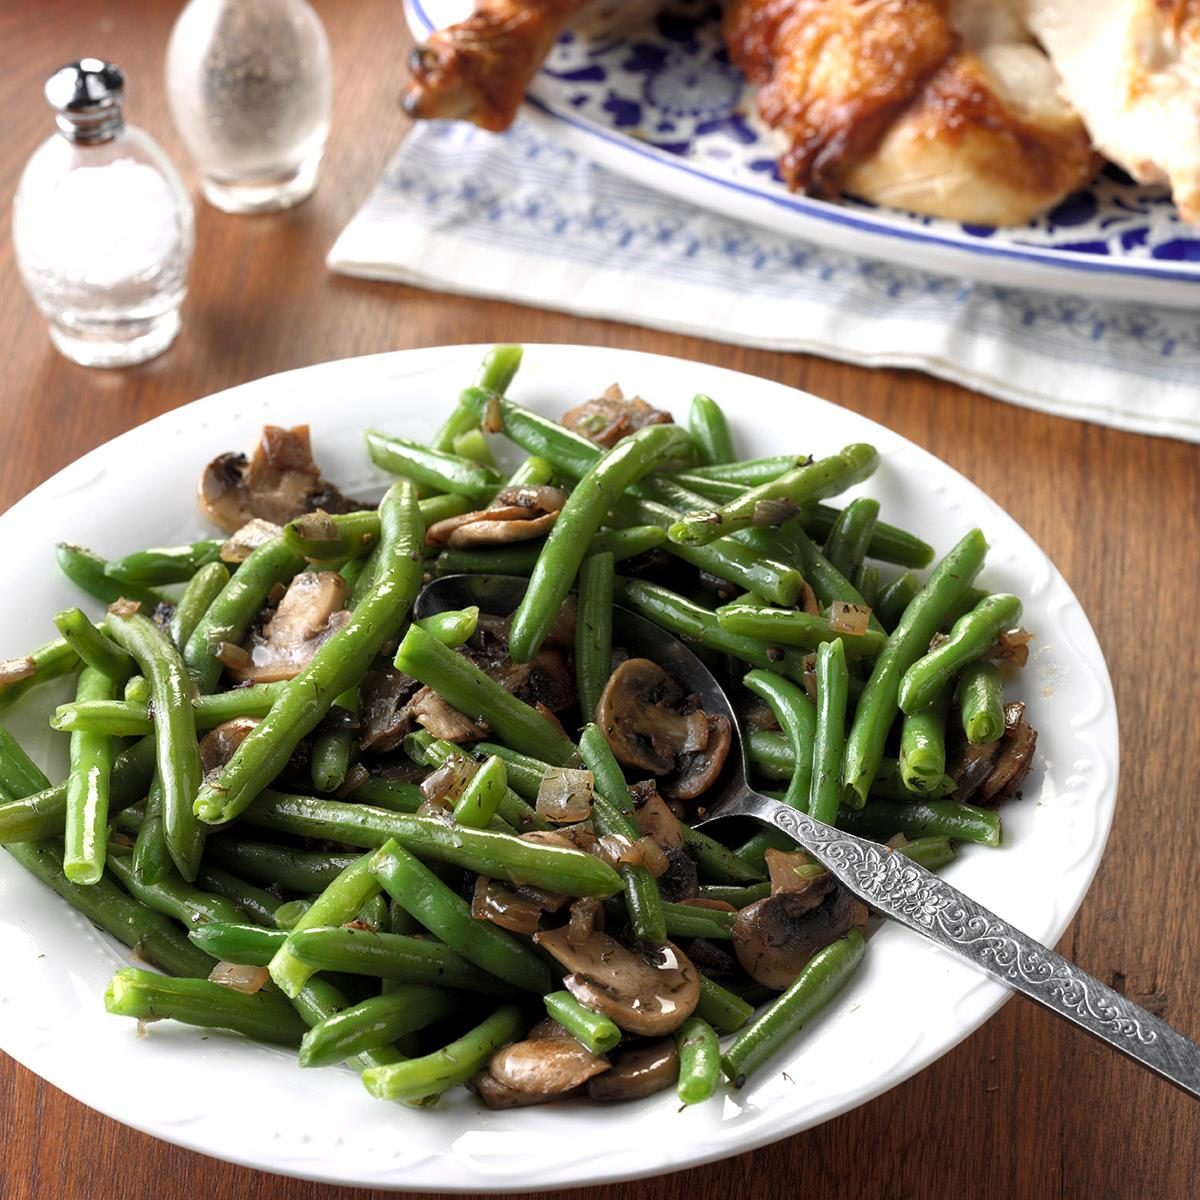 Green Beans With Shallots Exps Hrbz16 70901 D09 01 1b 3